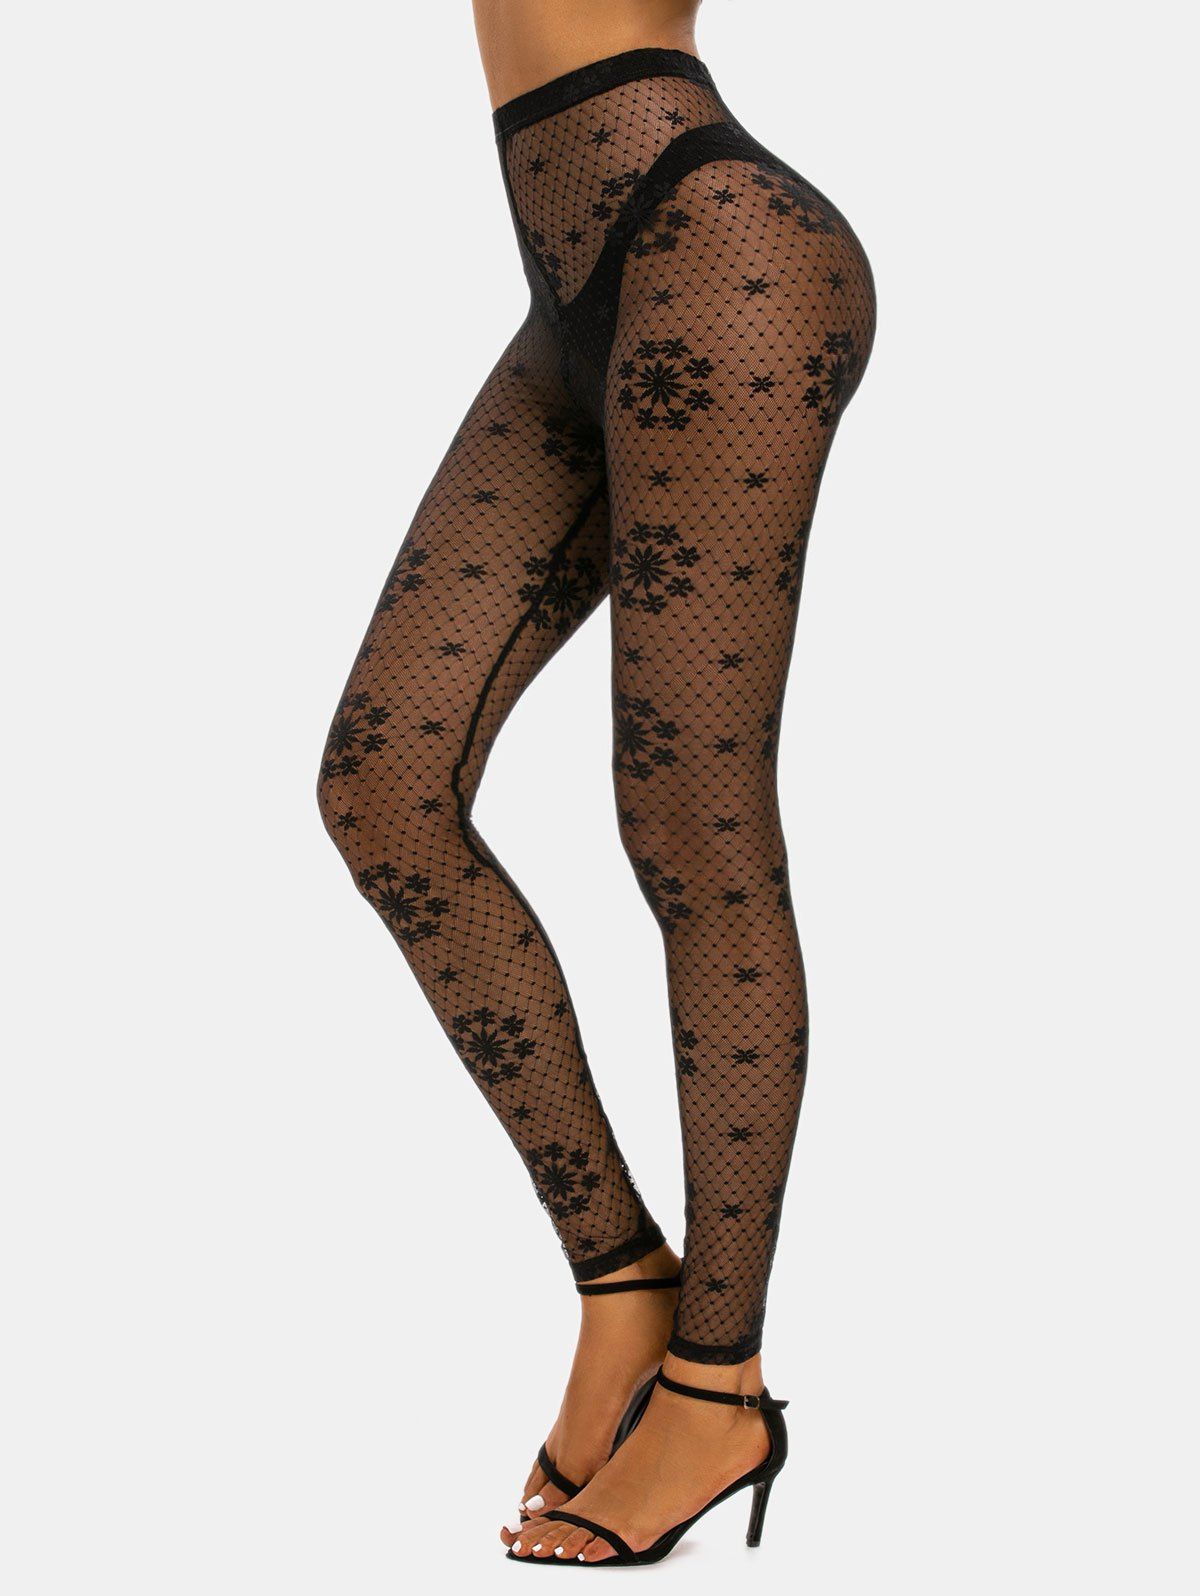 Lace See Through Leggings For Sale